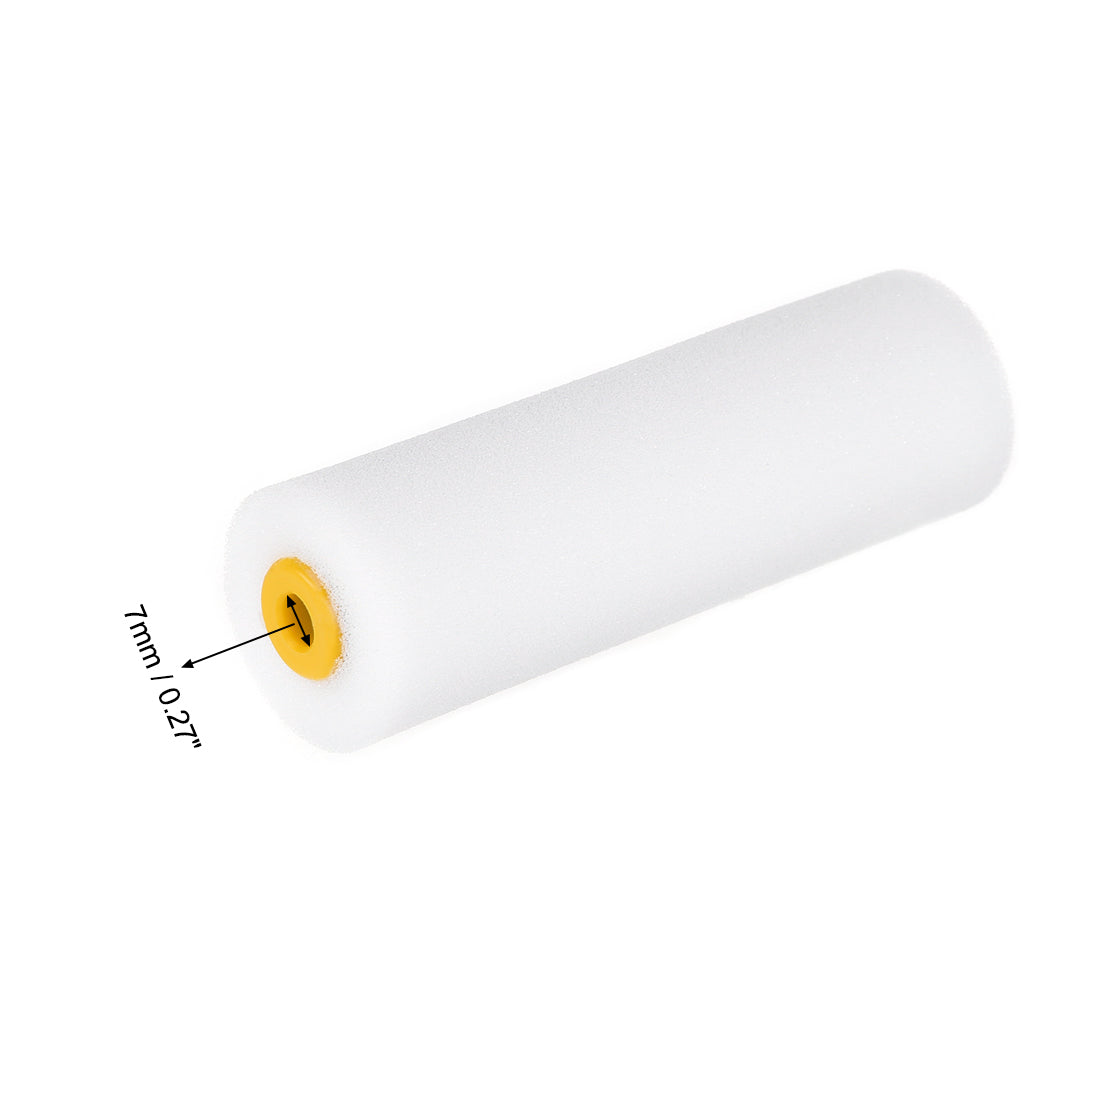 uxcell Uxcell Paint Roller Cover 4.5 Inch 110mm Mini Sponge Brush for Household Wall Painting Treatment 2pcs